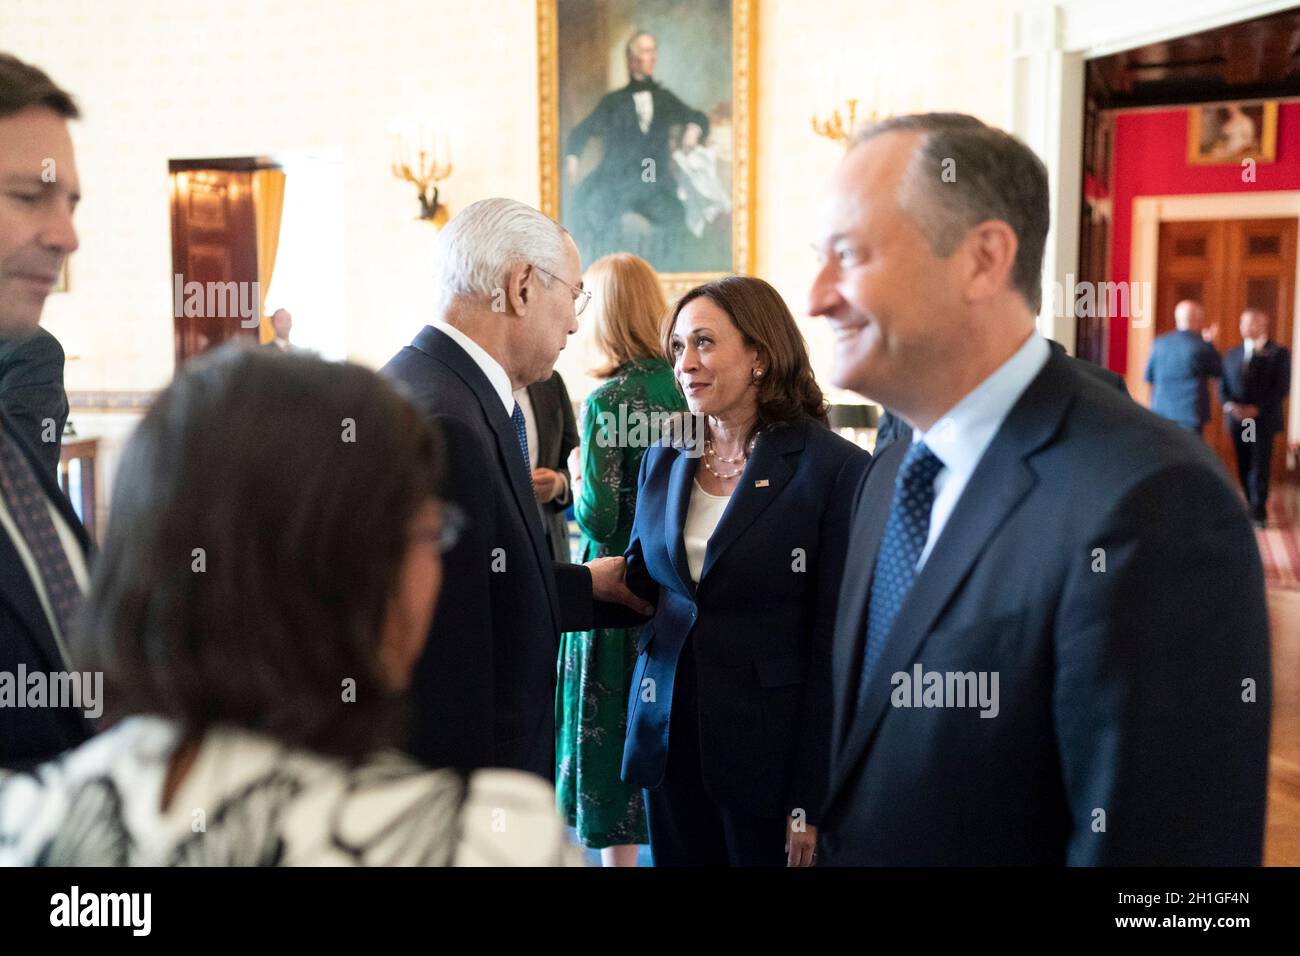 Washington, United States of America. 15 July, 2021. U.S Vice President Kamala Harris and Second Gentleman Douglas Emhoff greet guests at a dinner reception for German Chancellor Angela Merkel and her husband Professor Joachim Sauer in the Blue Room of the White House July 15, 2021in Washington, D.C. Credit: Lawrence Jackson/White House Photo/Alamy Live News Stock Photo